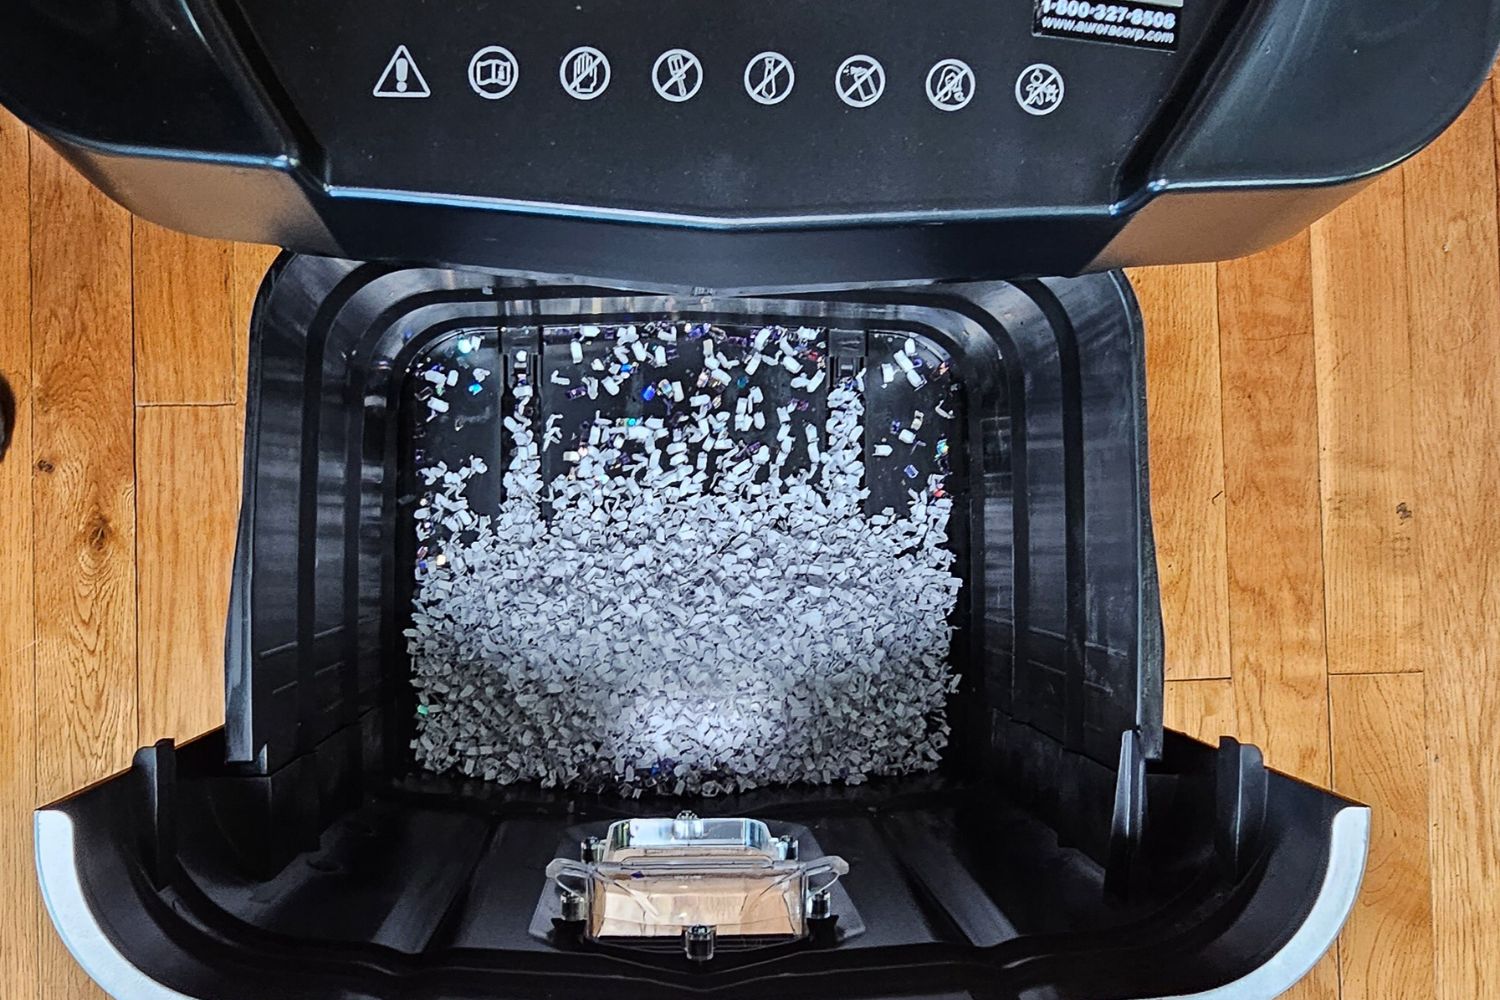 A look into the waste bin of the Aurora paper shredder, which has fine micro-cut paper shreds inside